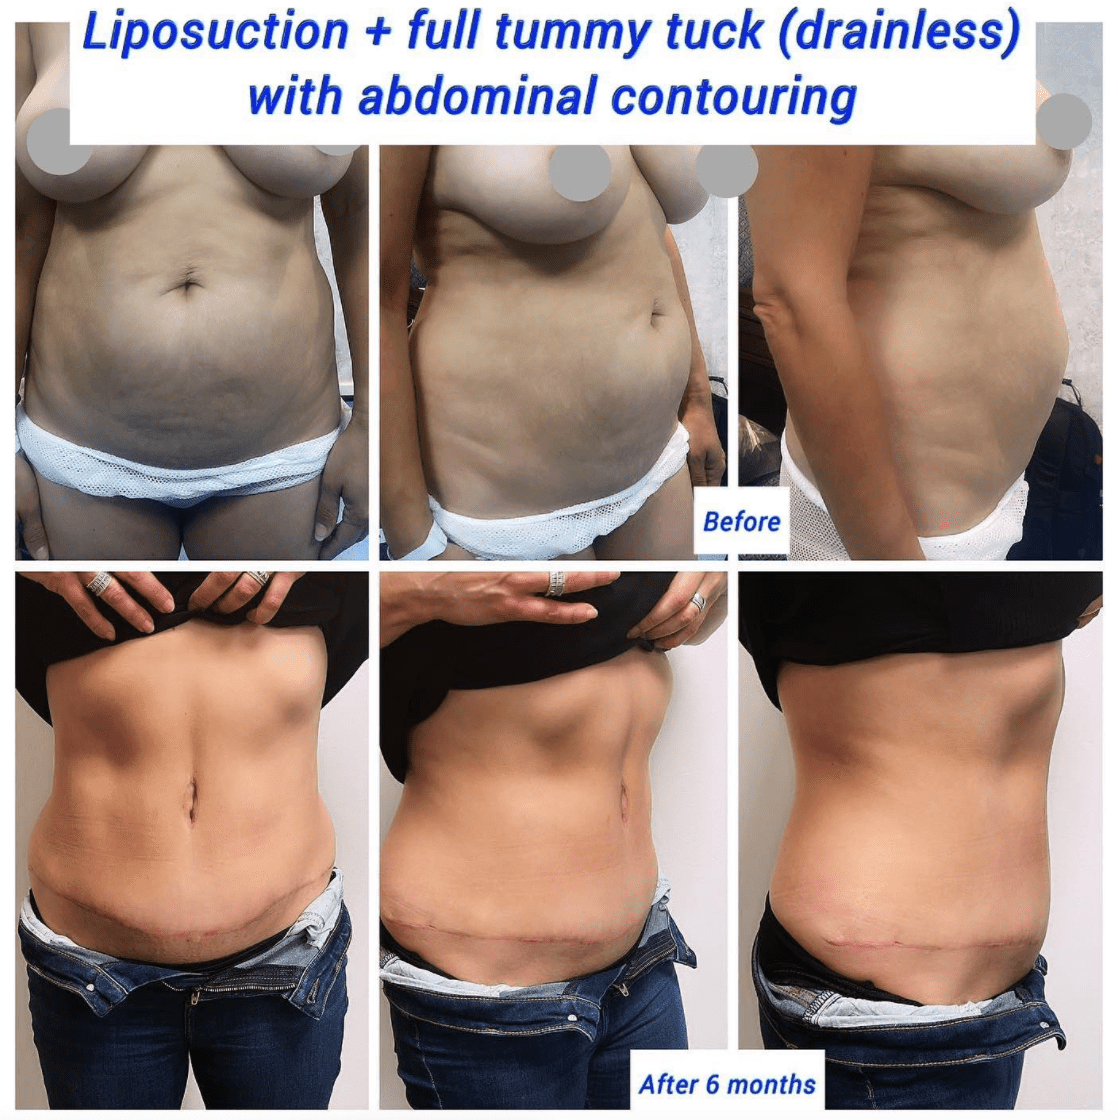 liposuction and drainless tummy tuck with abdominal contouring